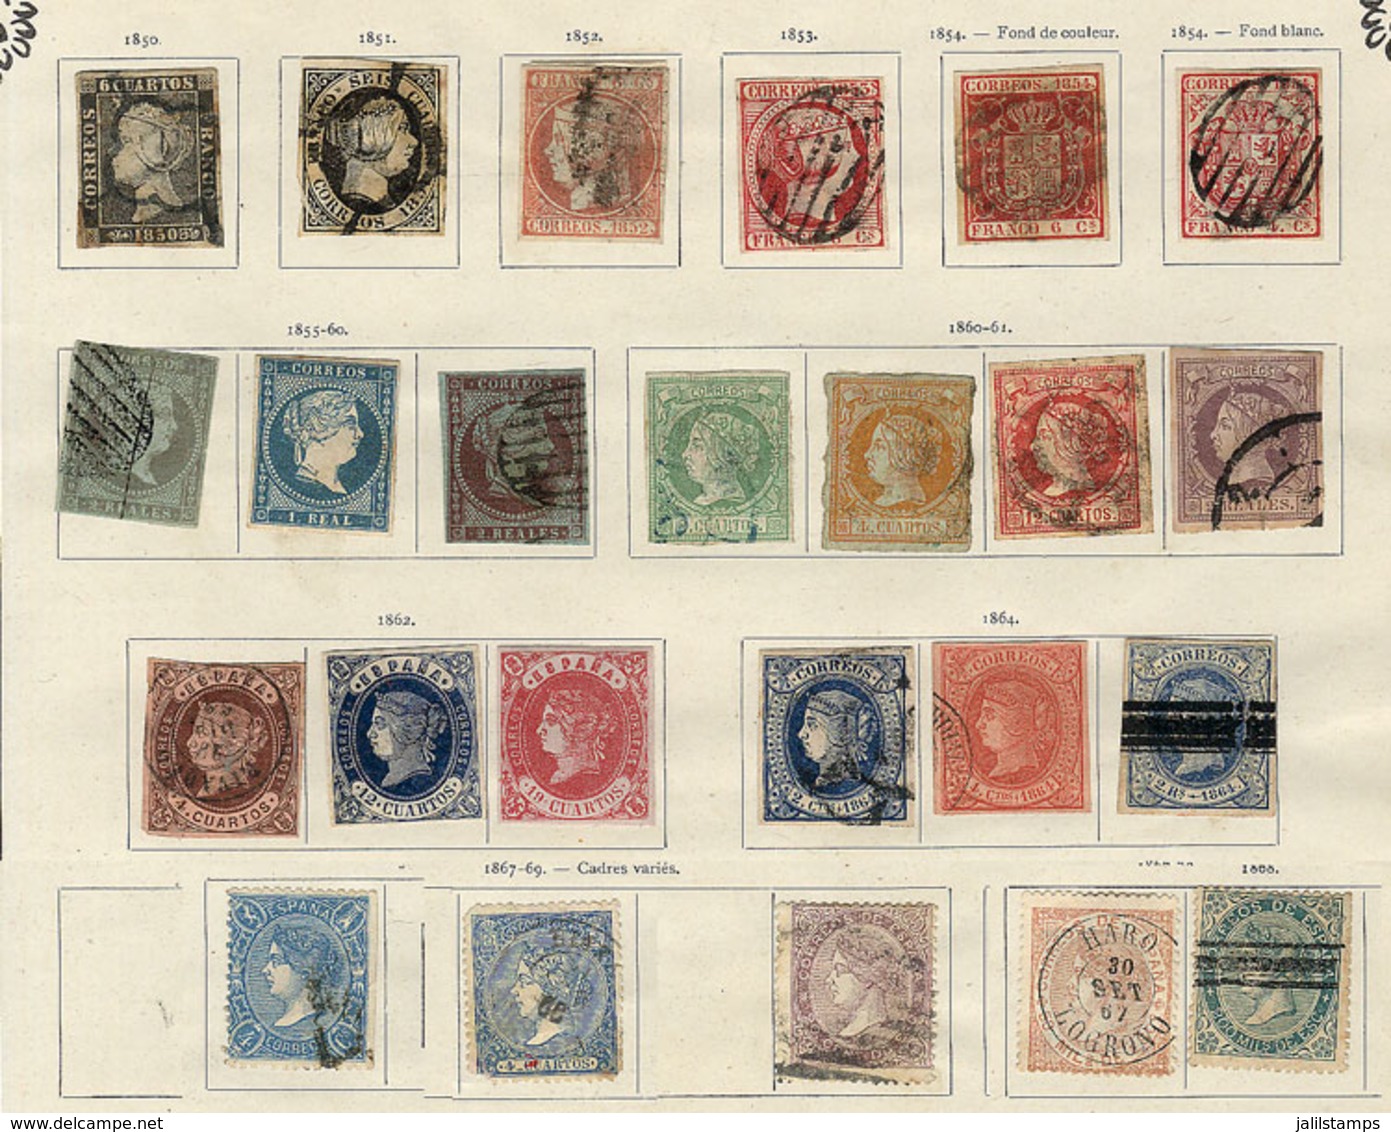 SPAIN: Old Collection On Album Pages, Used Or Mint Stamps, Fine General Quality (some May Have Defects), Good Opportunit - Colecciones